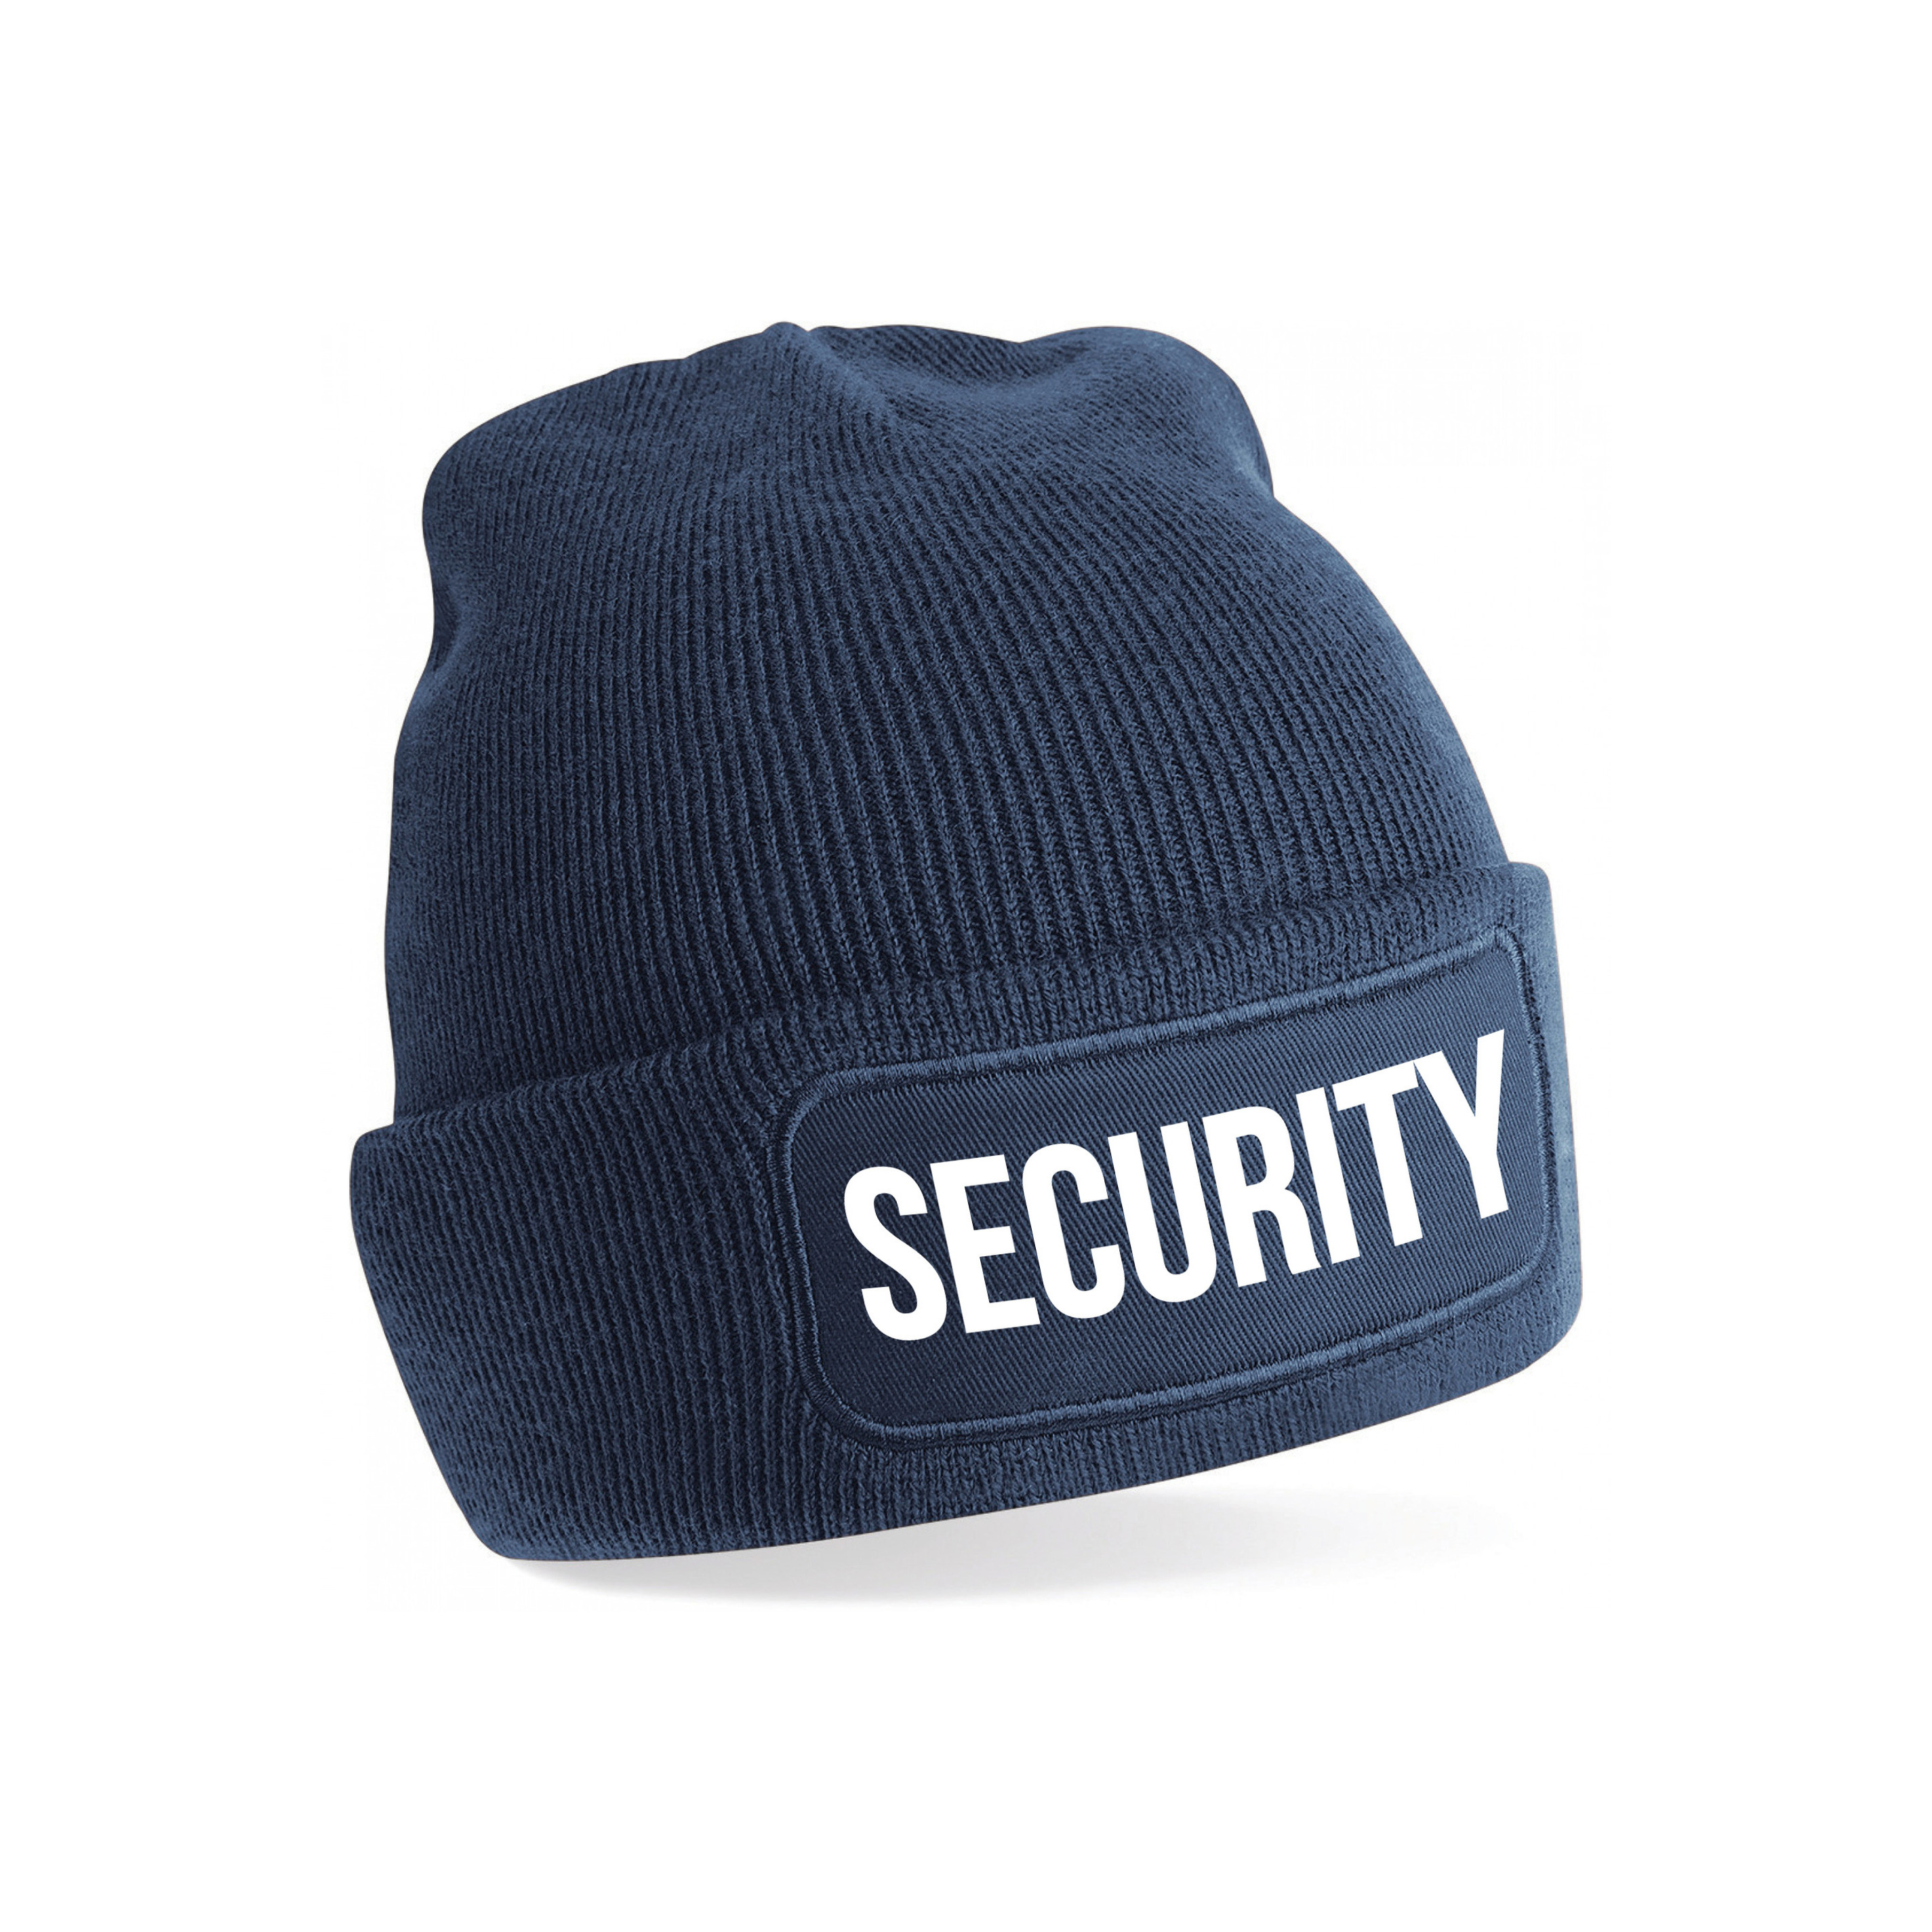 Security muts unisex - one size - navy - apres-ski muts One size -